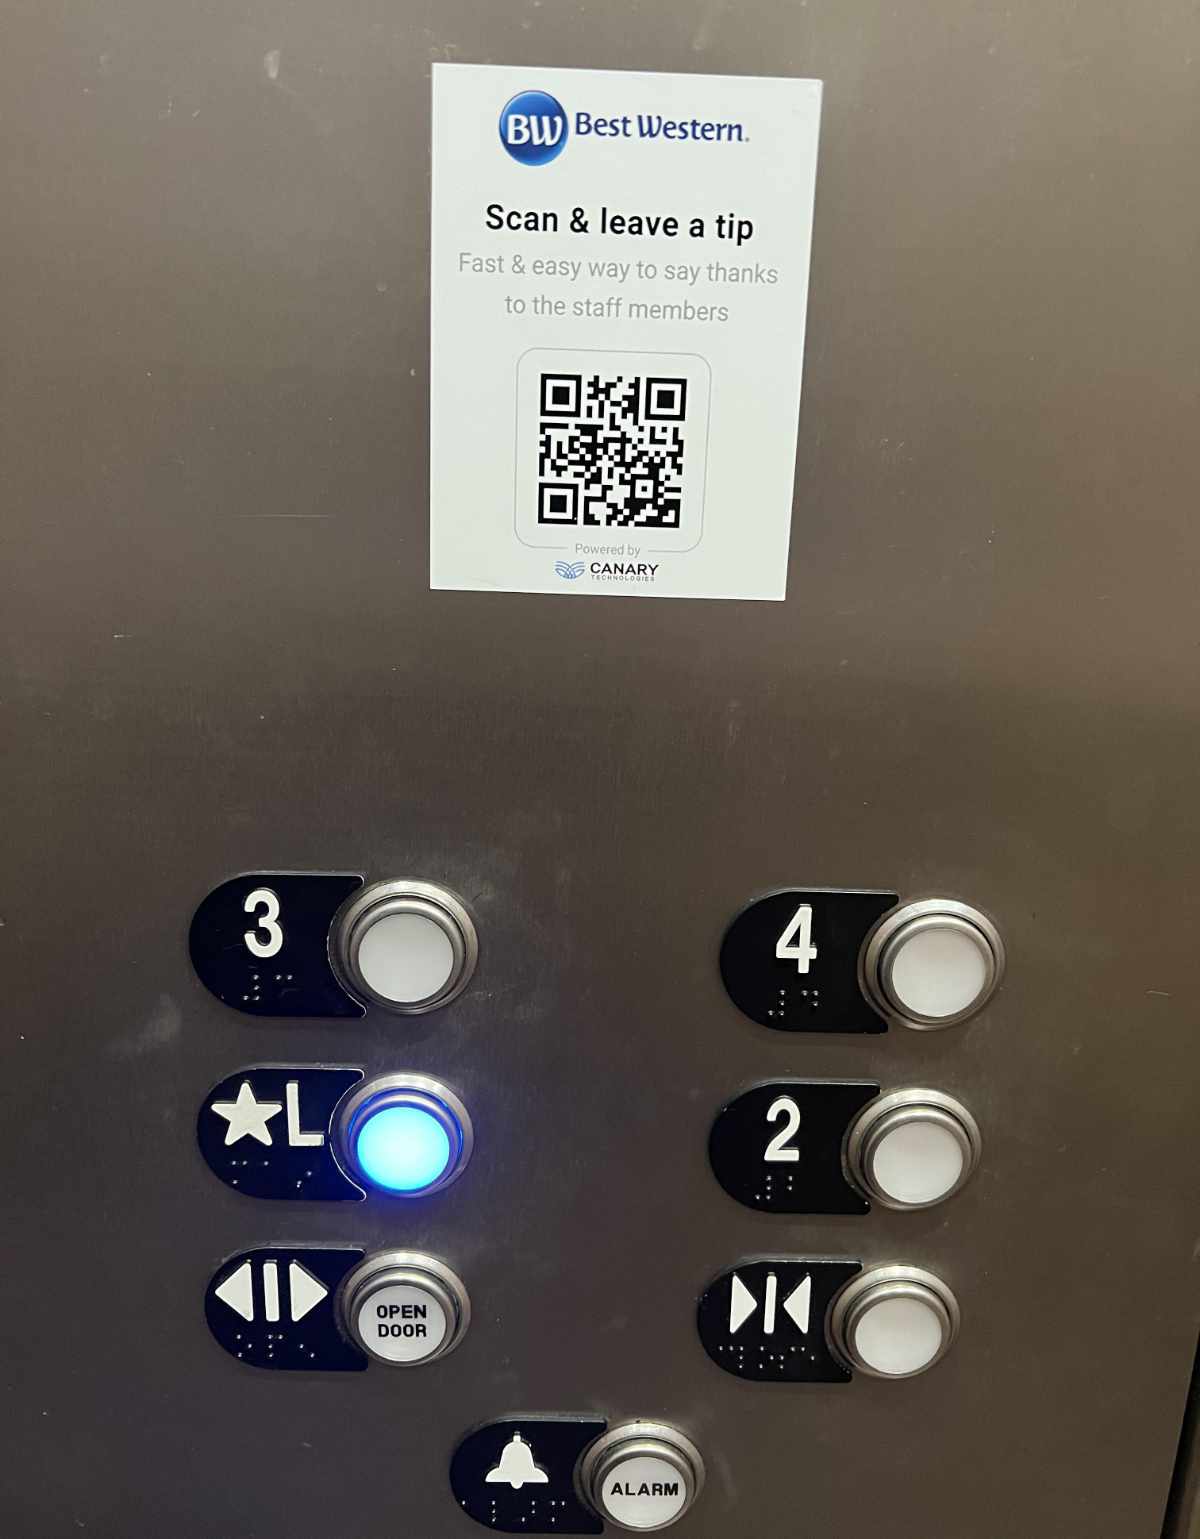 Even the elevators are asking for tips now